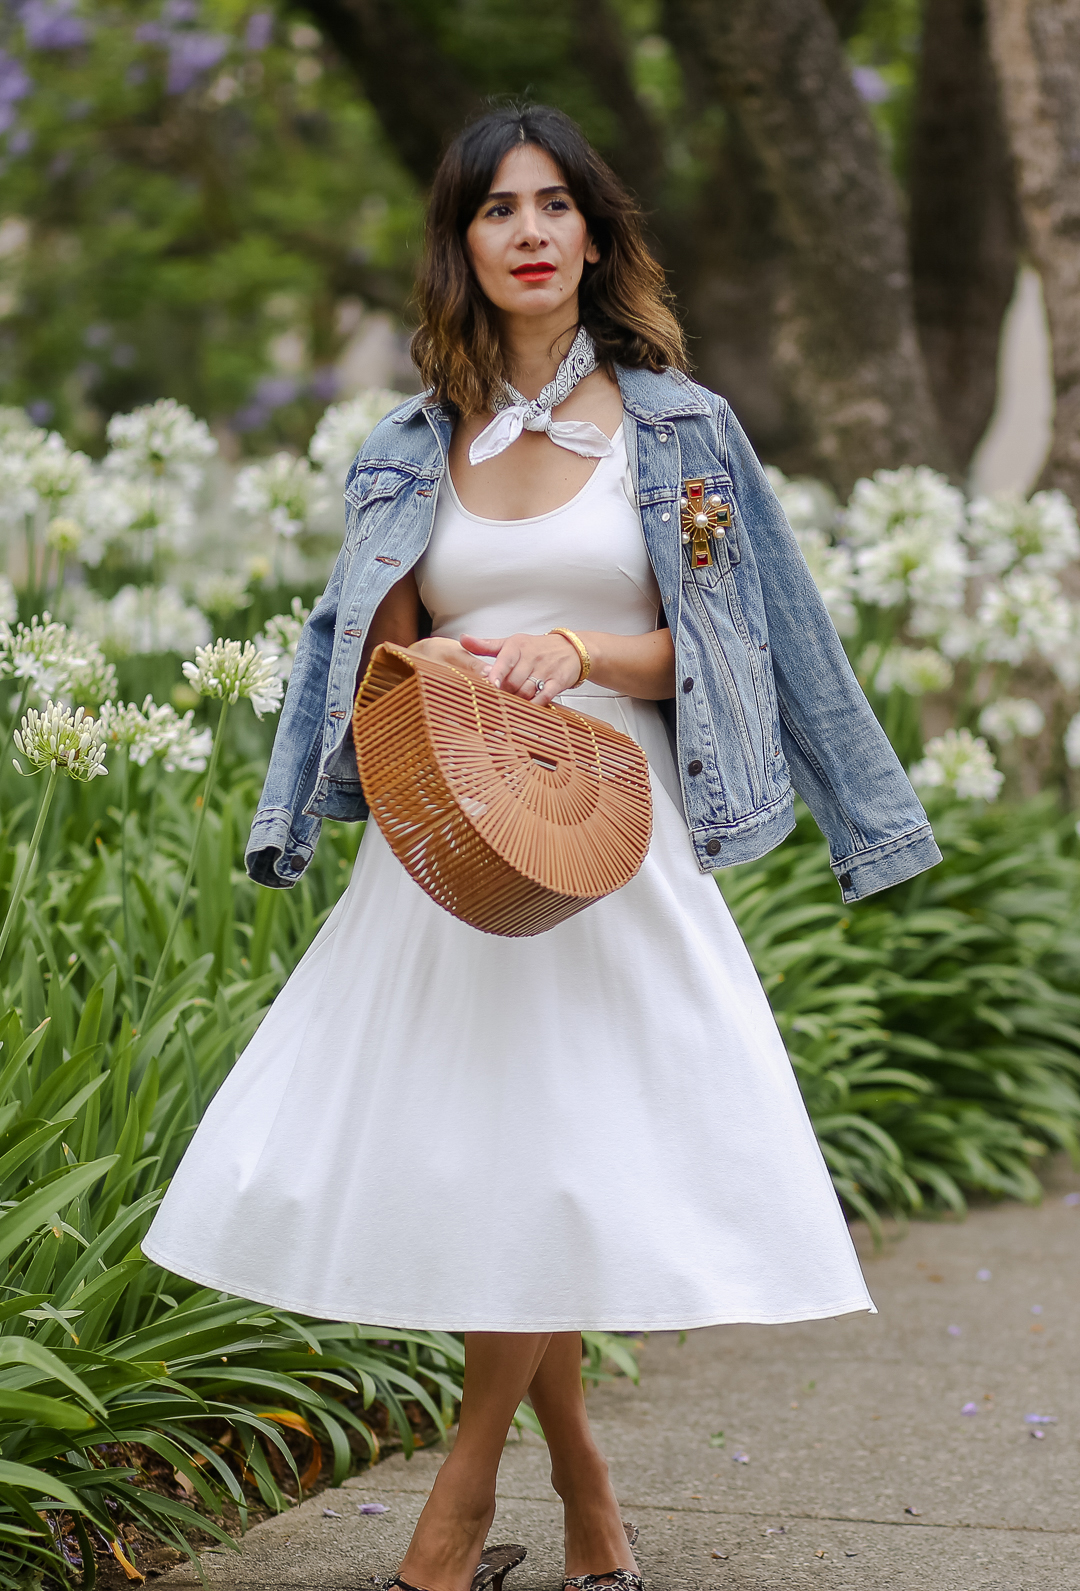 How to Wear a White Dress and Denim Jacket Outfit Ideas